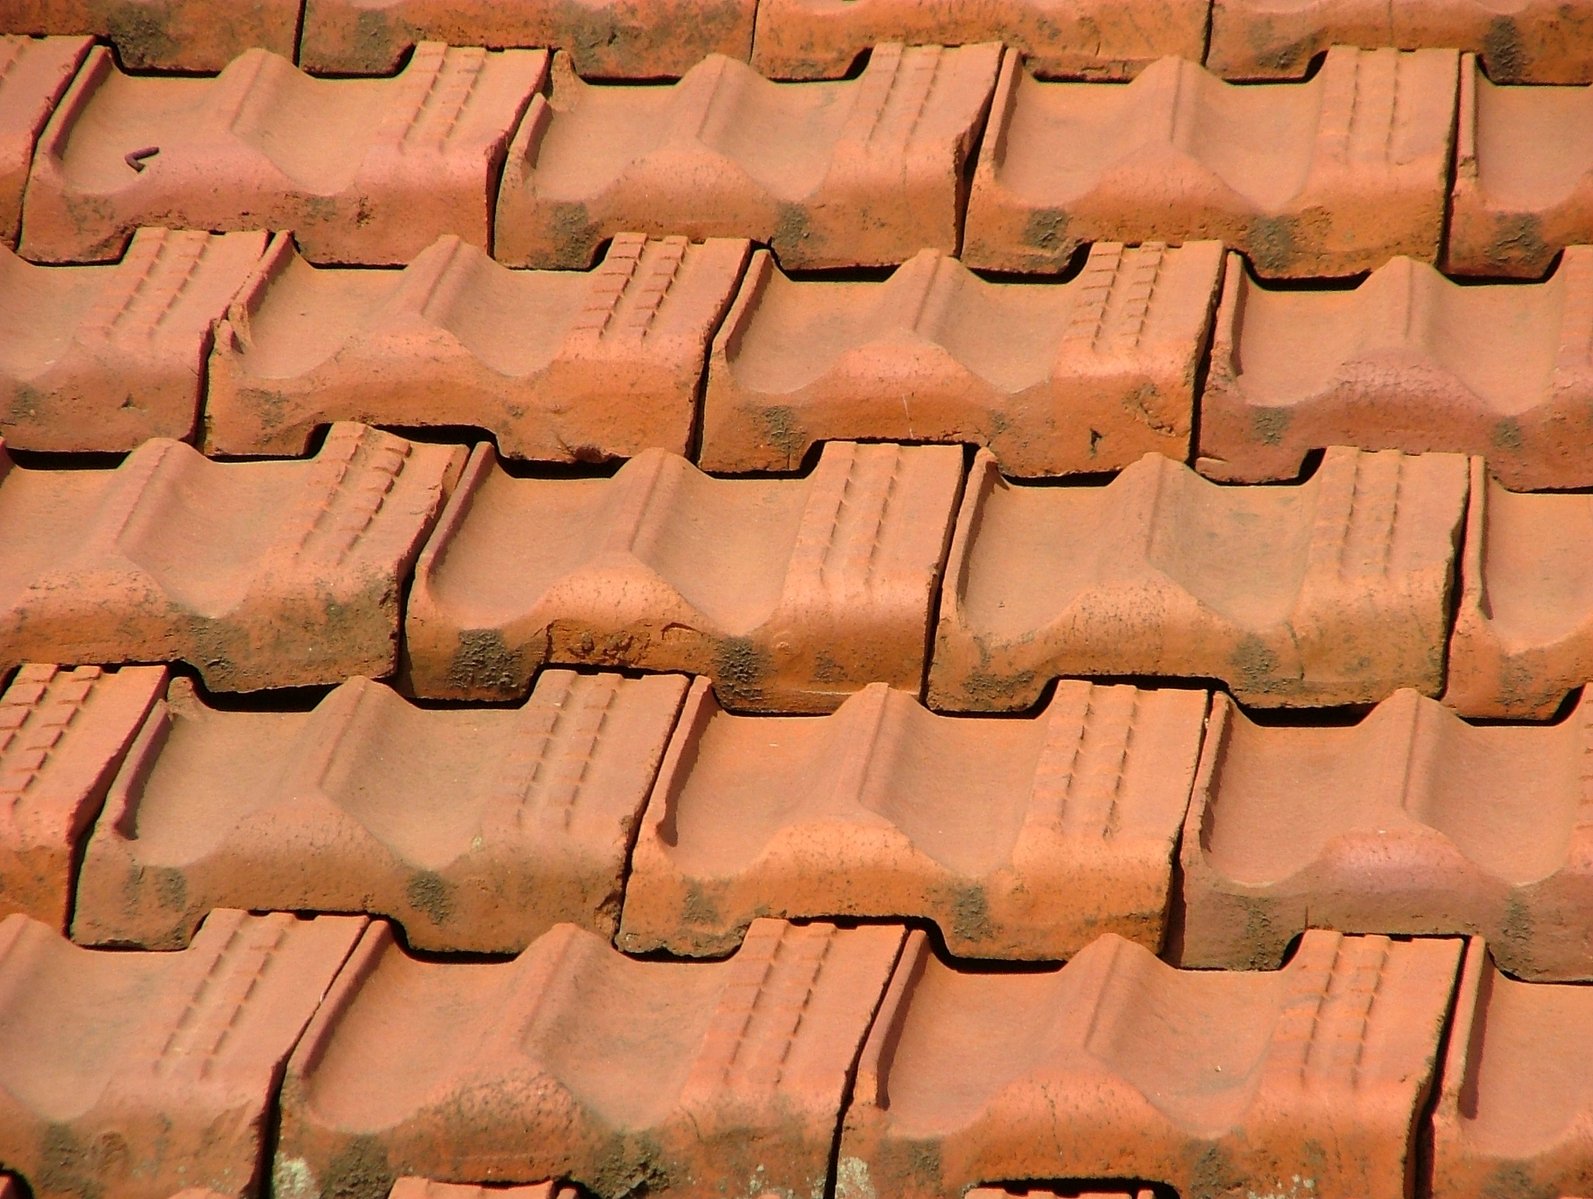 a red clay roof with three rows of gutter roofs